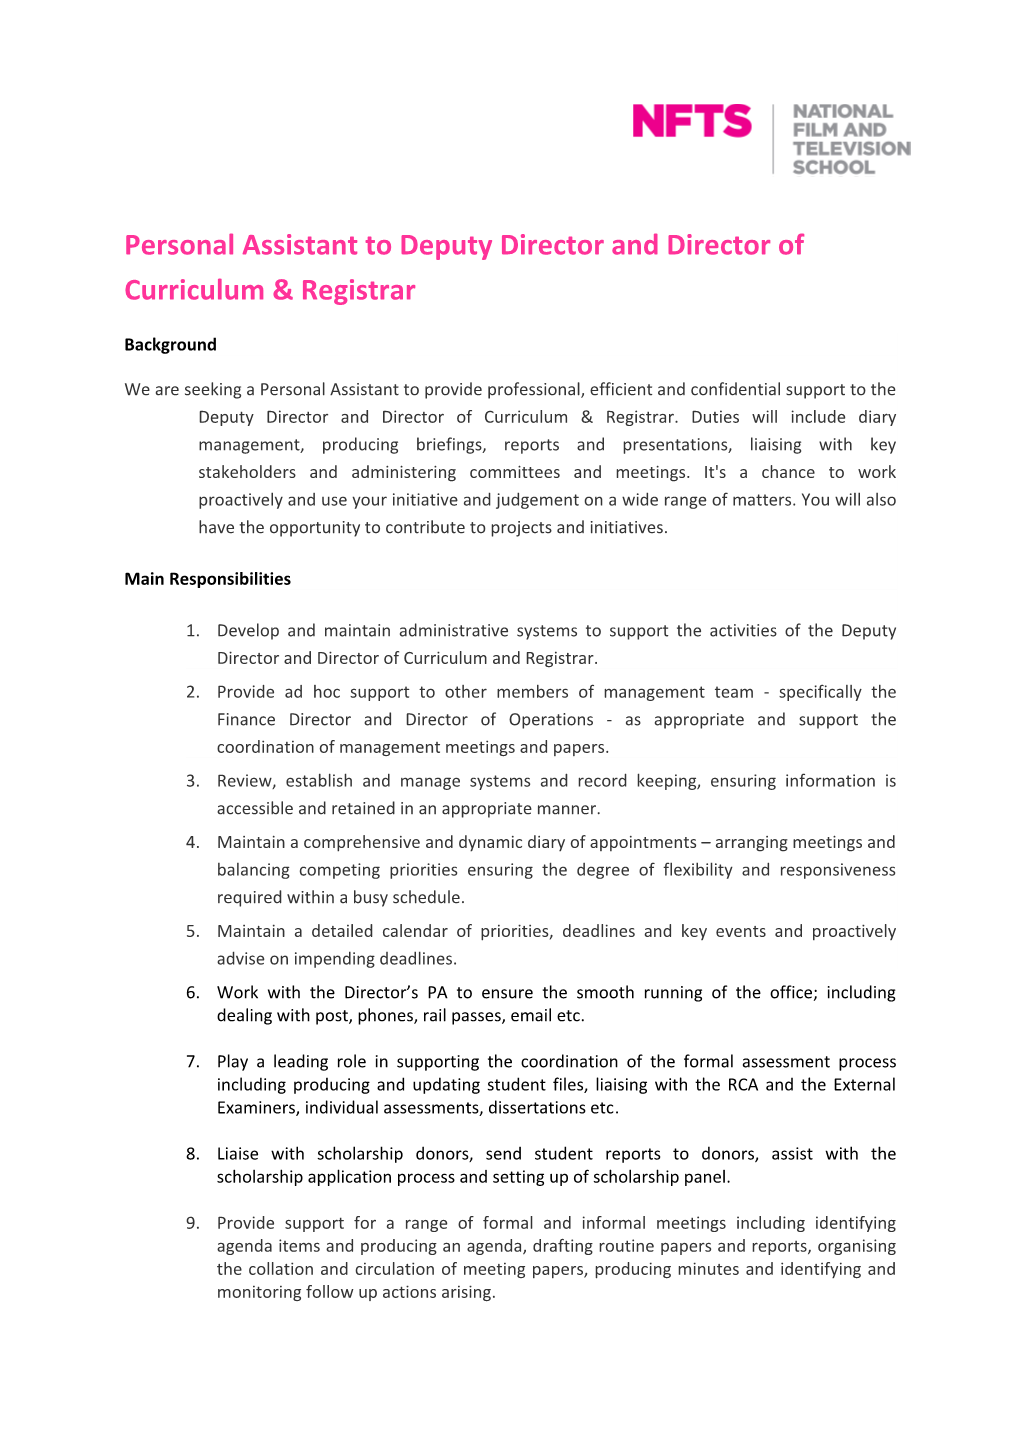 Personal Assistant to Deputy Director and Director of Curriculum & Registrar